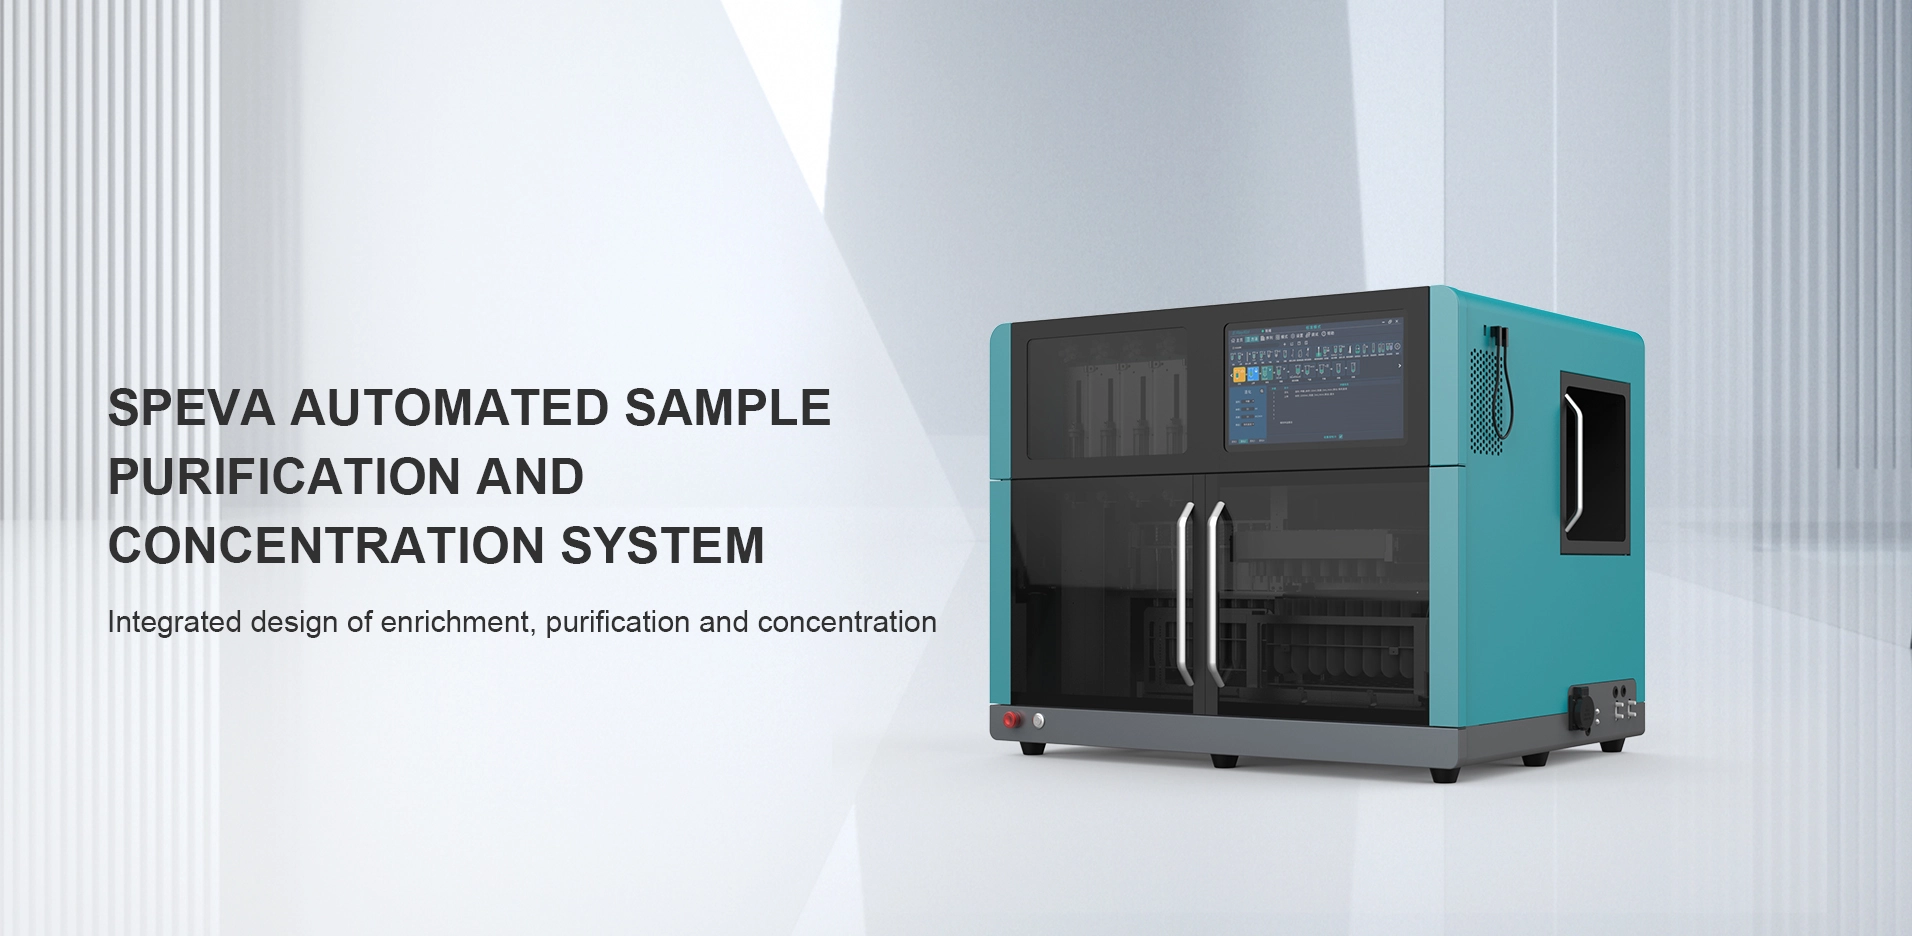 SPEVA AUTOMATED SAMPLE PURIFICATION AND CONCENTRATION SYSTEM